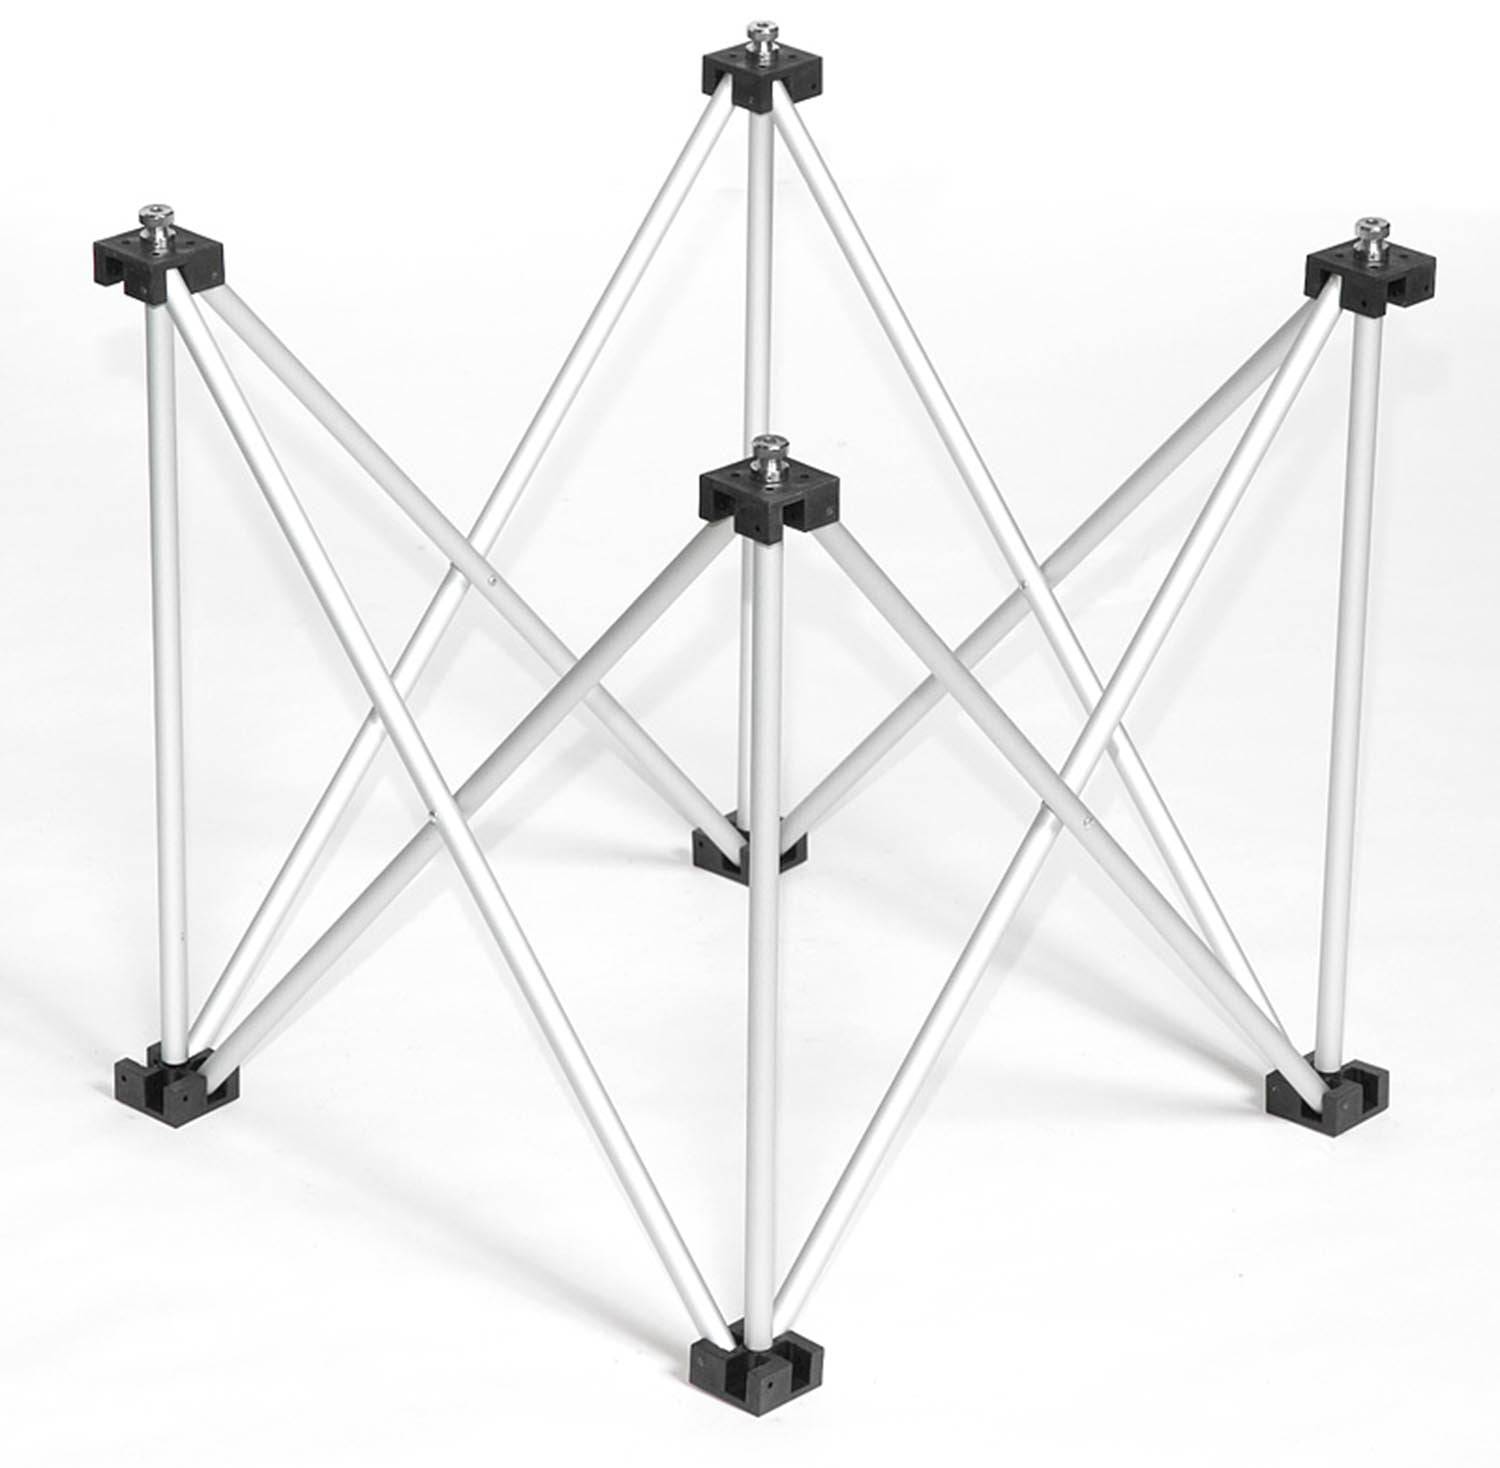 Intellistage IST3X16, 16 Inches High Equilateral Triangle Riser for 3 x 3 Feet Folding Stage Platforms - Hollywood DJ